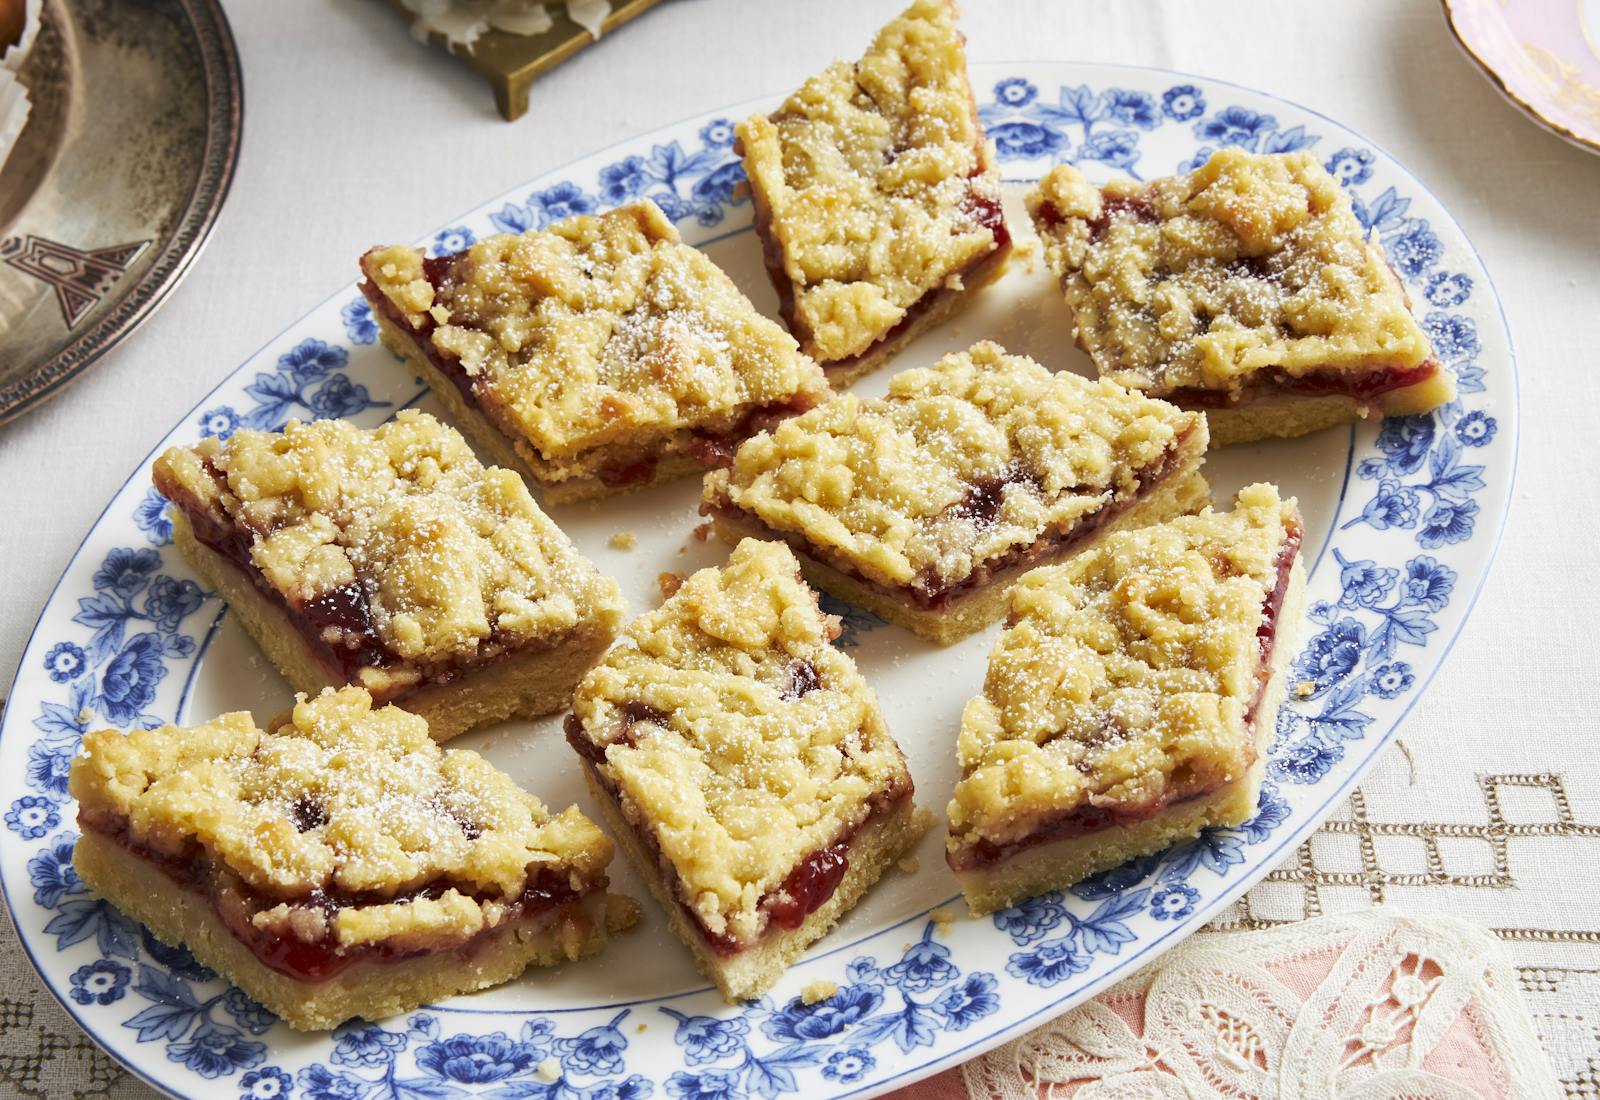 Jam crumble bars on blue floral plate.